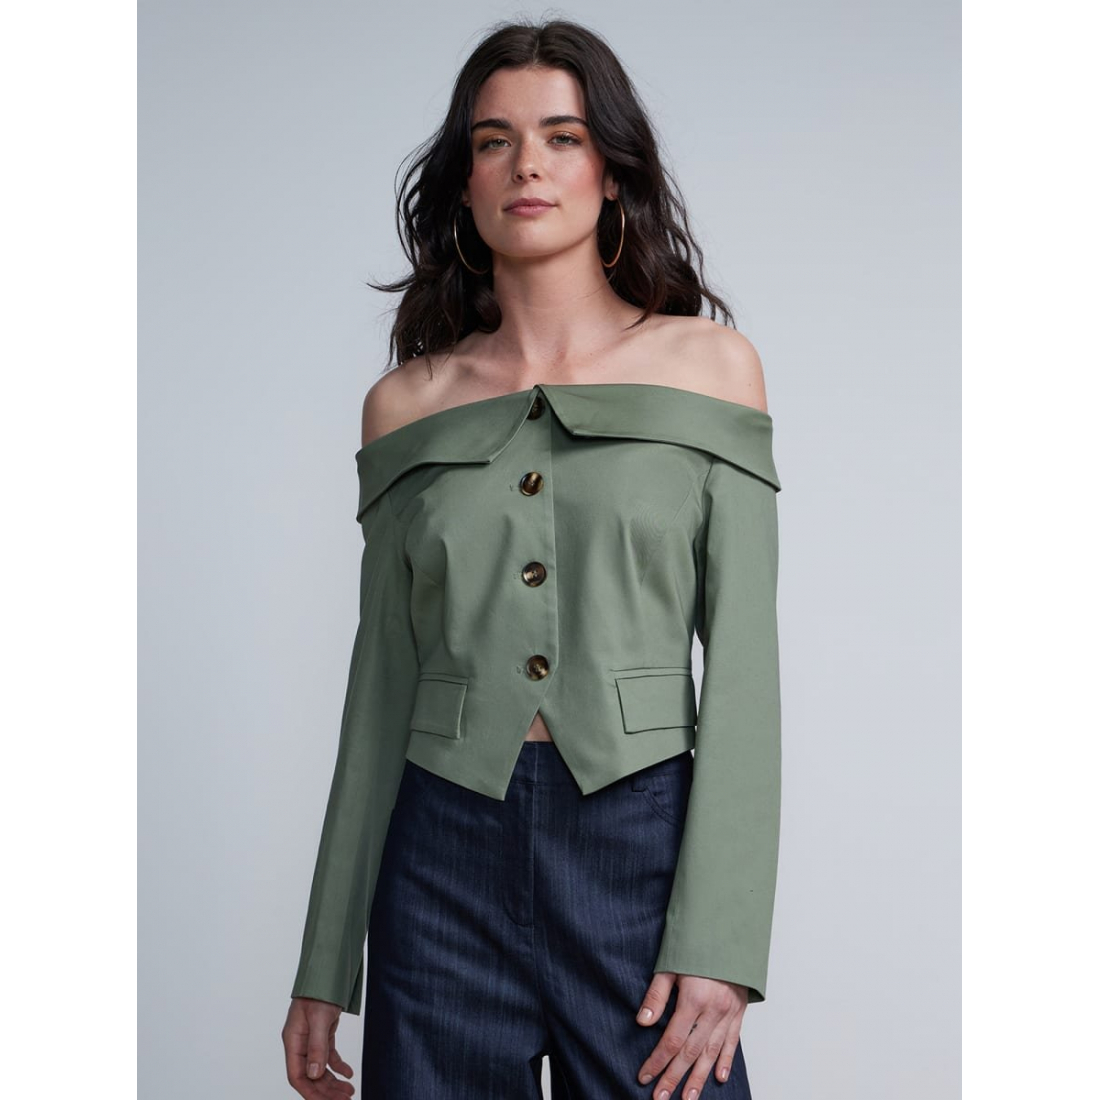 Women's 'Buttoned' Off the shoulder top